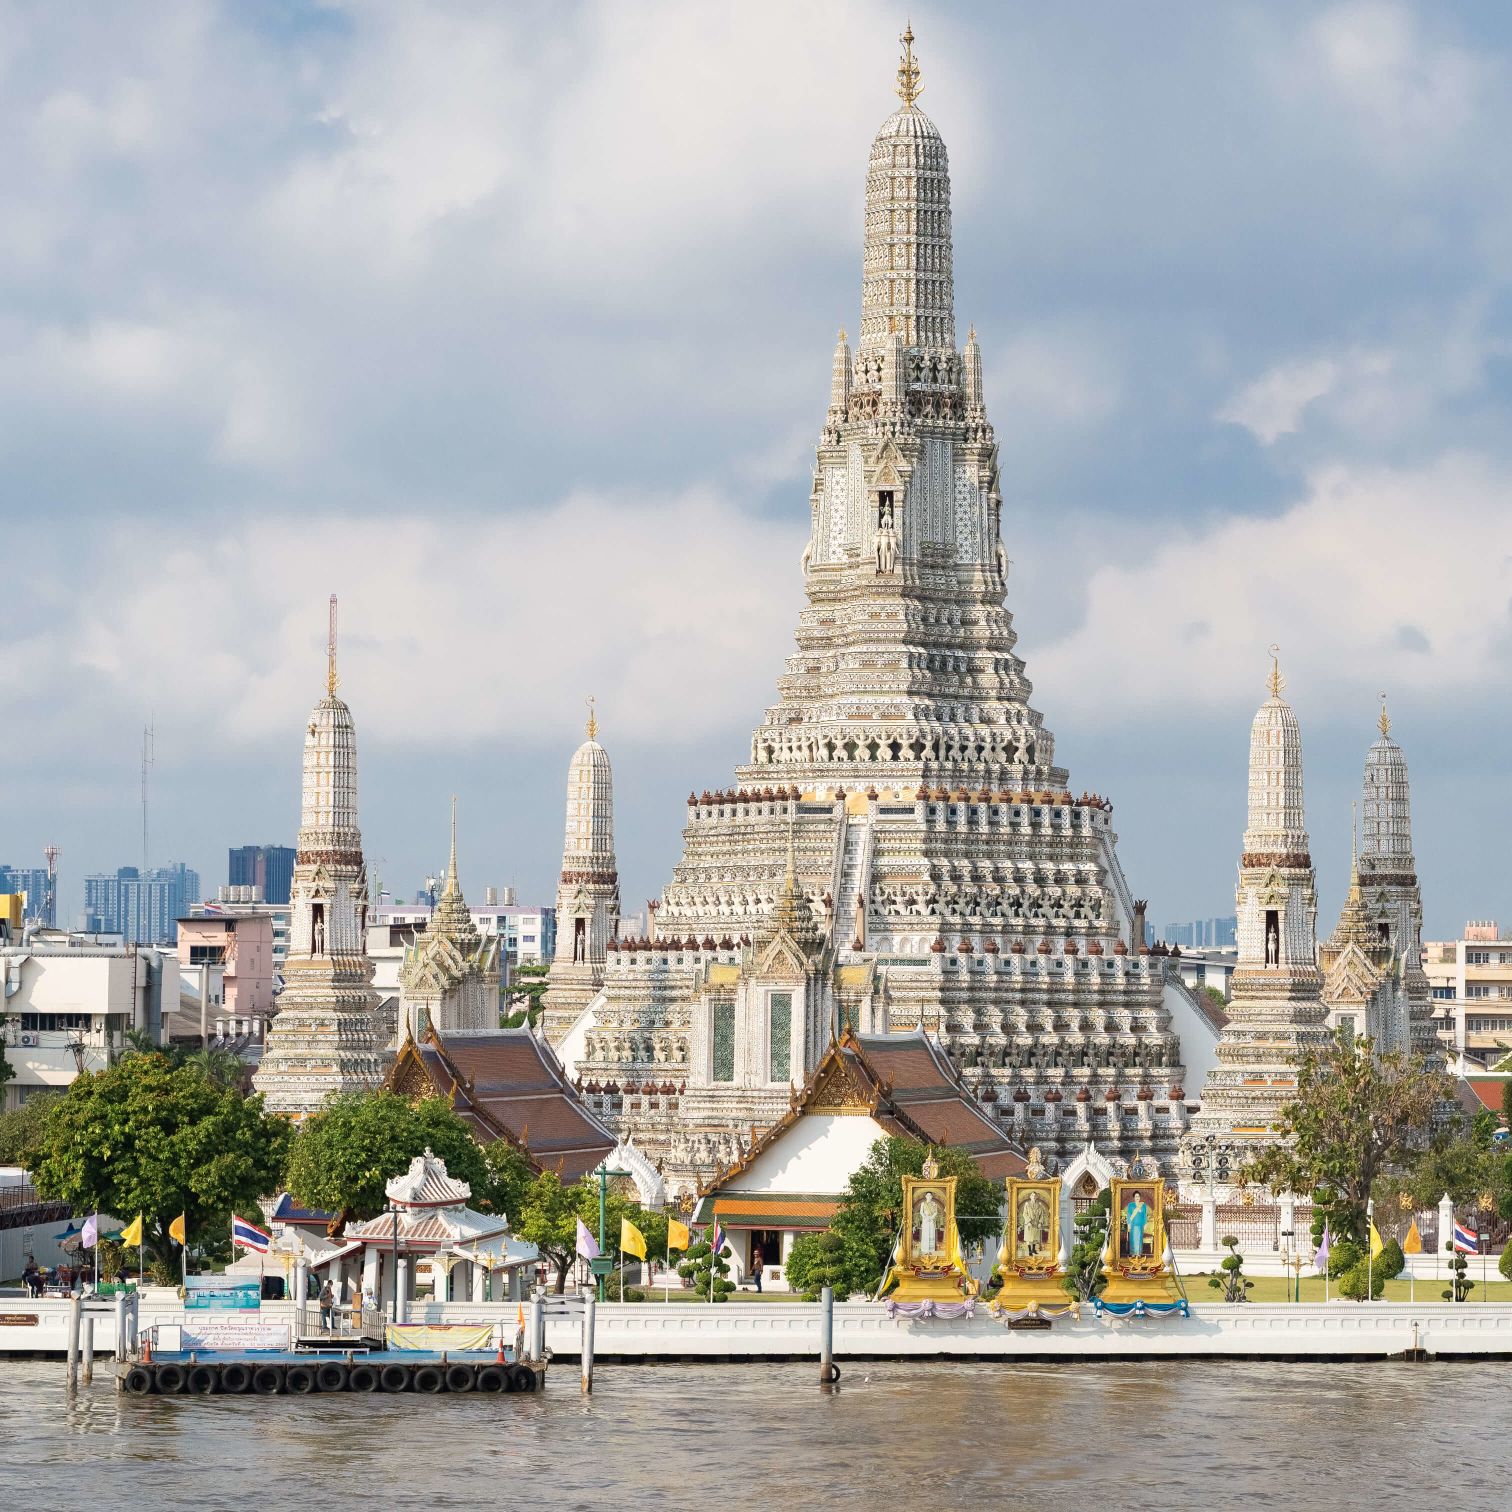 A Large Building With Towers With Wat Arun In The Background